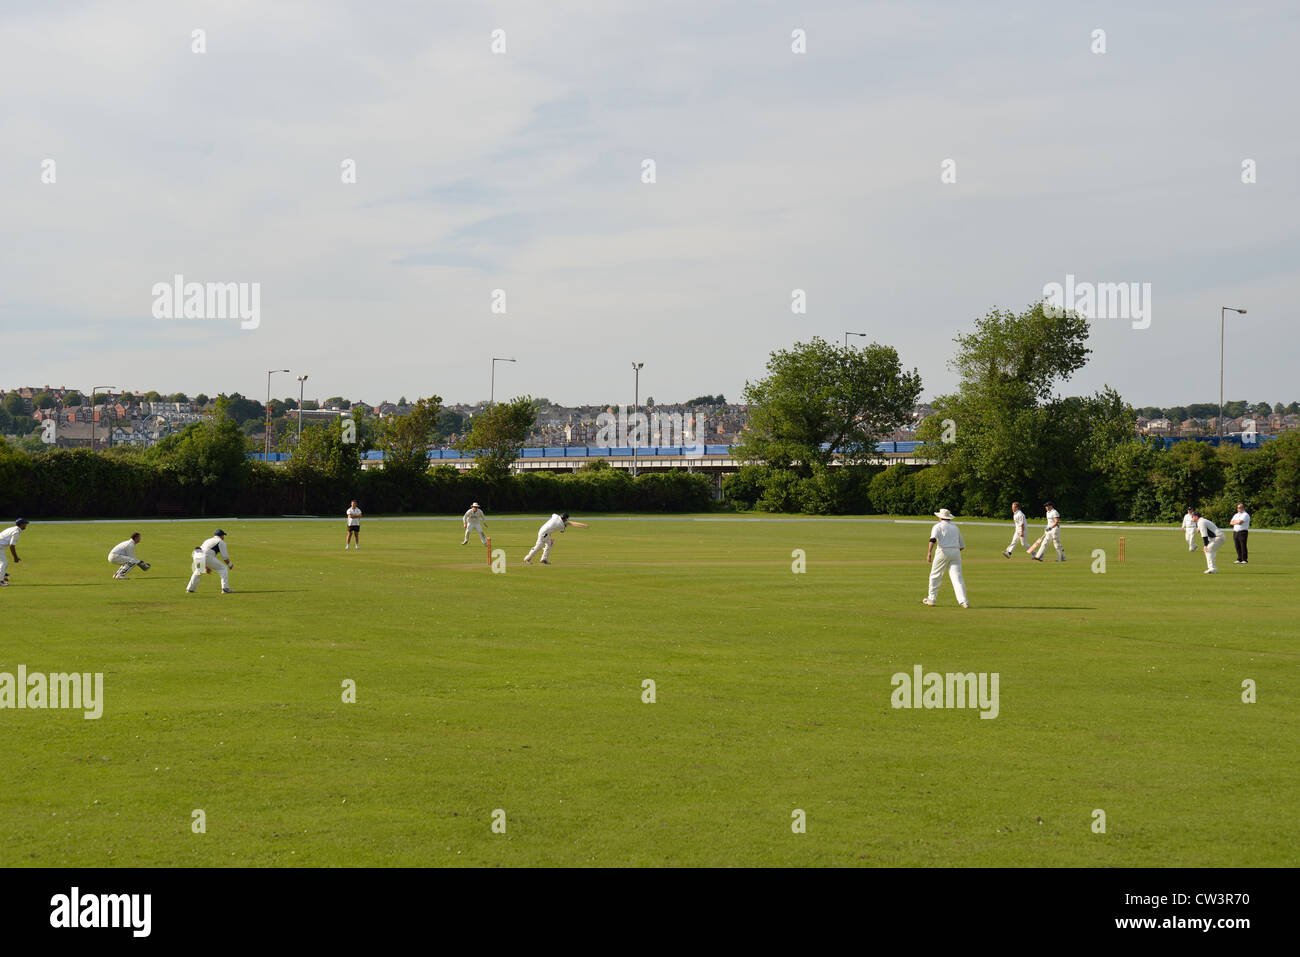 Cricket match by seafront, Barry Island, Barry, Vale of Glamorgan, Wales, United Kingdom Stock Photo